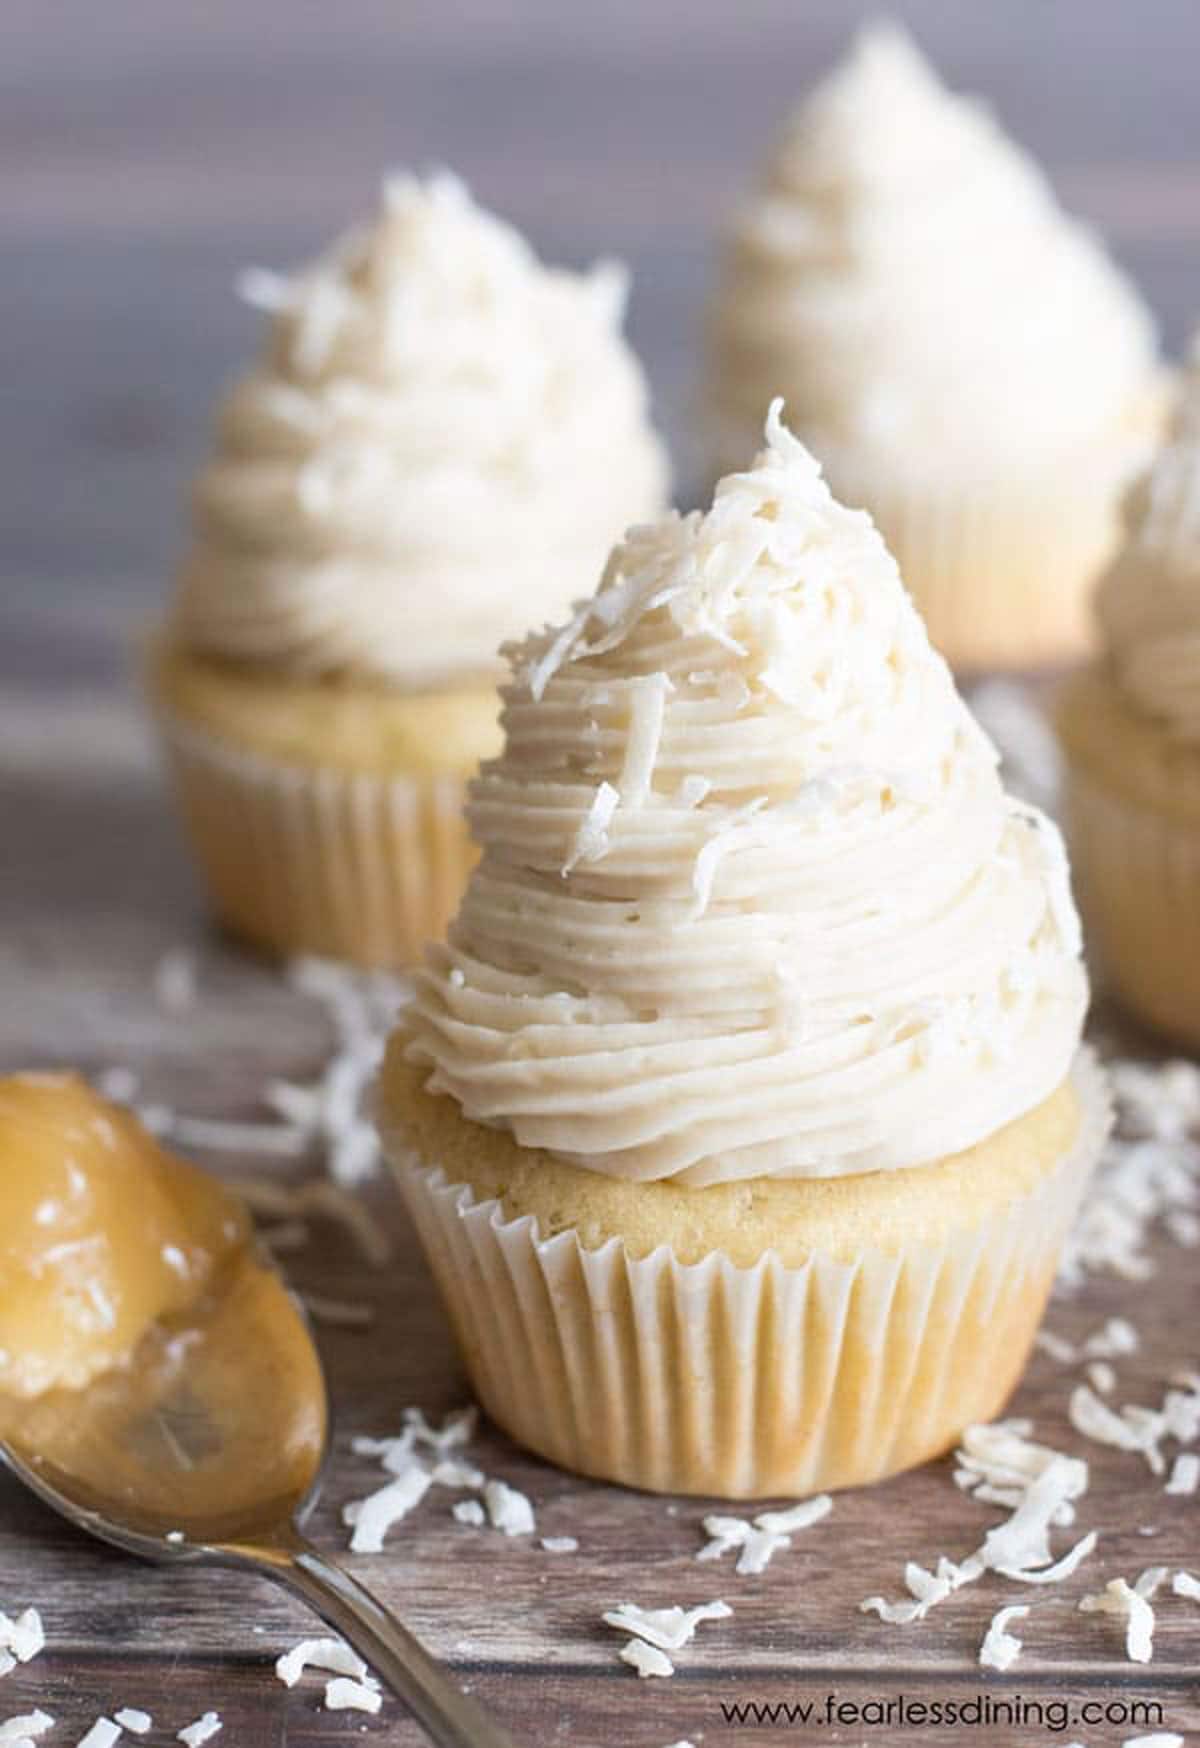 Three lemon filled cupcakes topped with buttercream frosting.